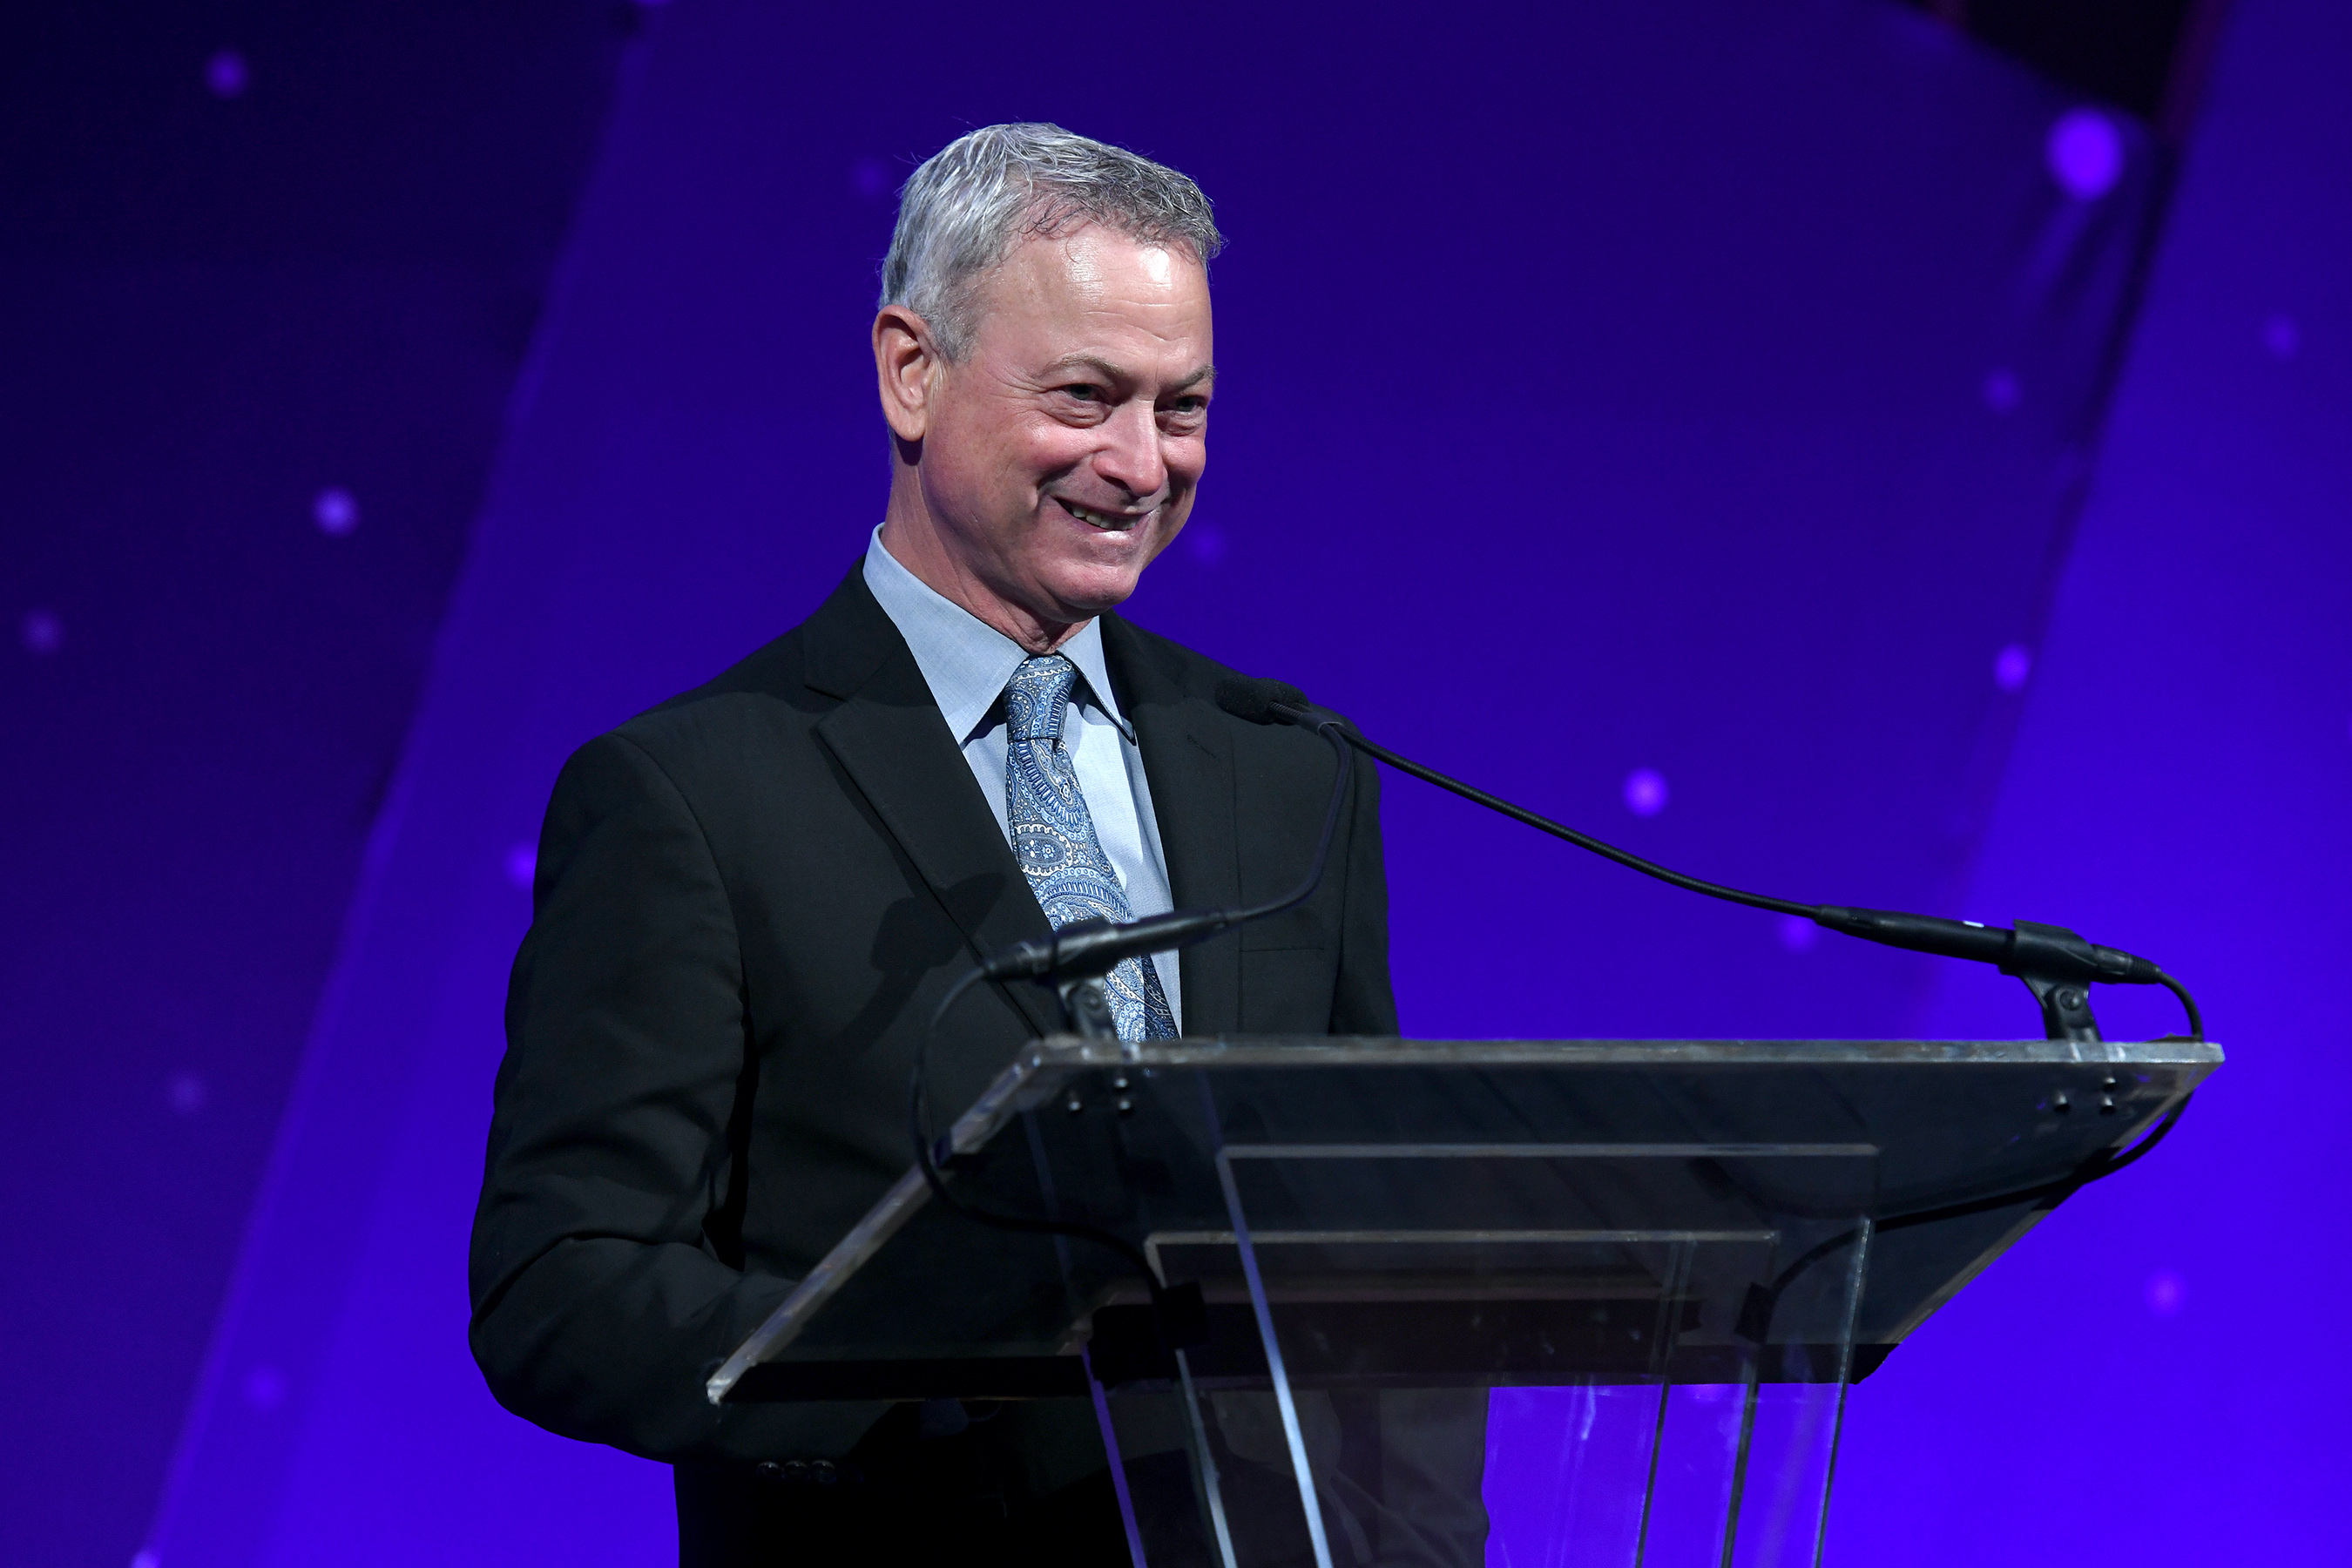 Actor, director and philanthropist Gary Sinise shares how Volunteer of the Year, David Cordani, has tirelessly supported Achilles International and the veteran community.